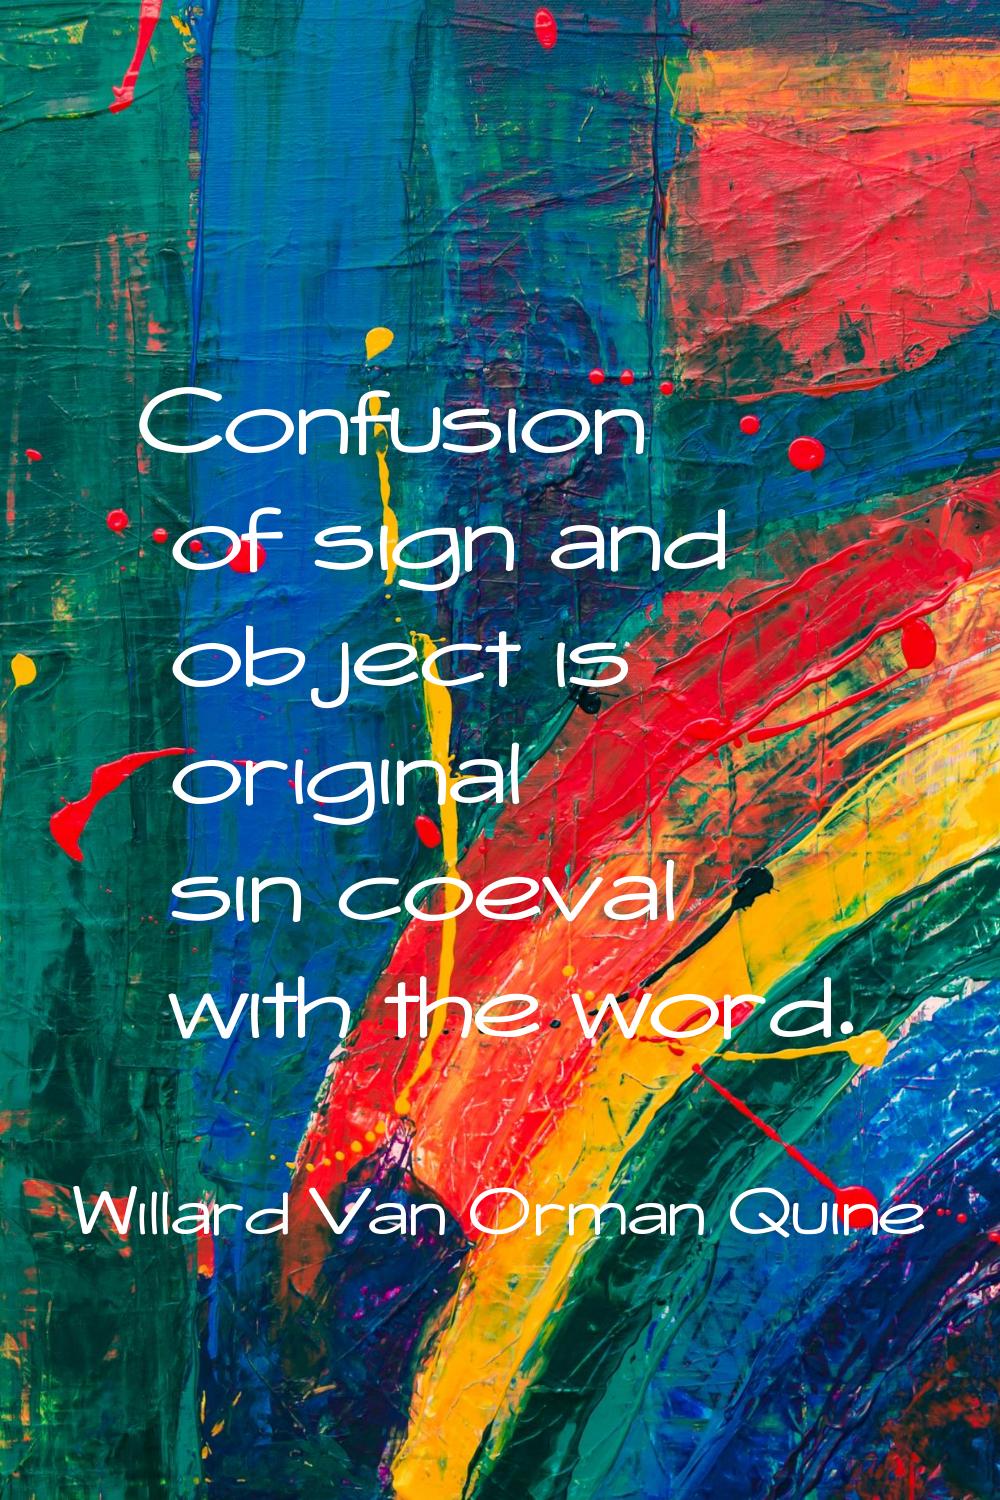 Confusion of sign and object is original sin coeval with the word.